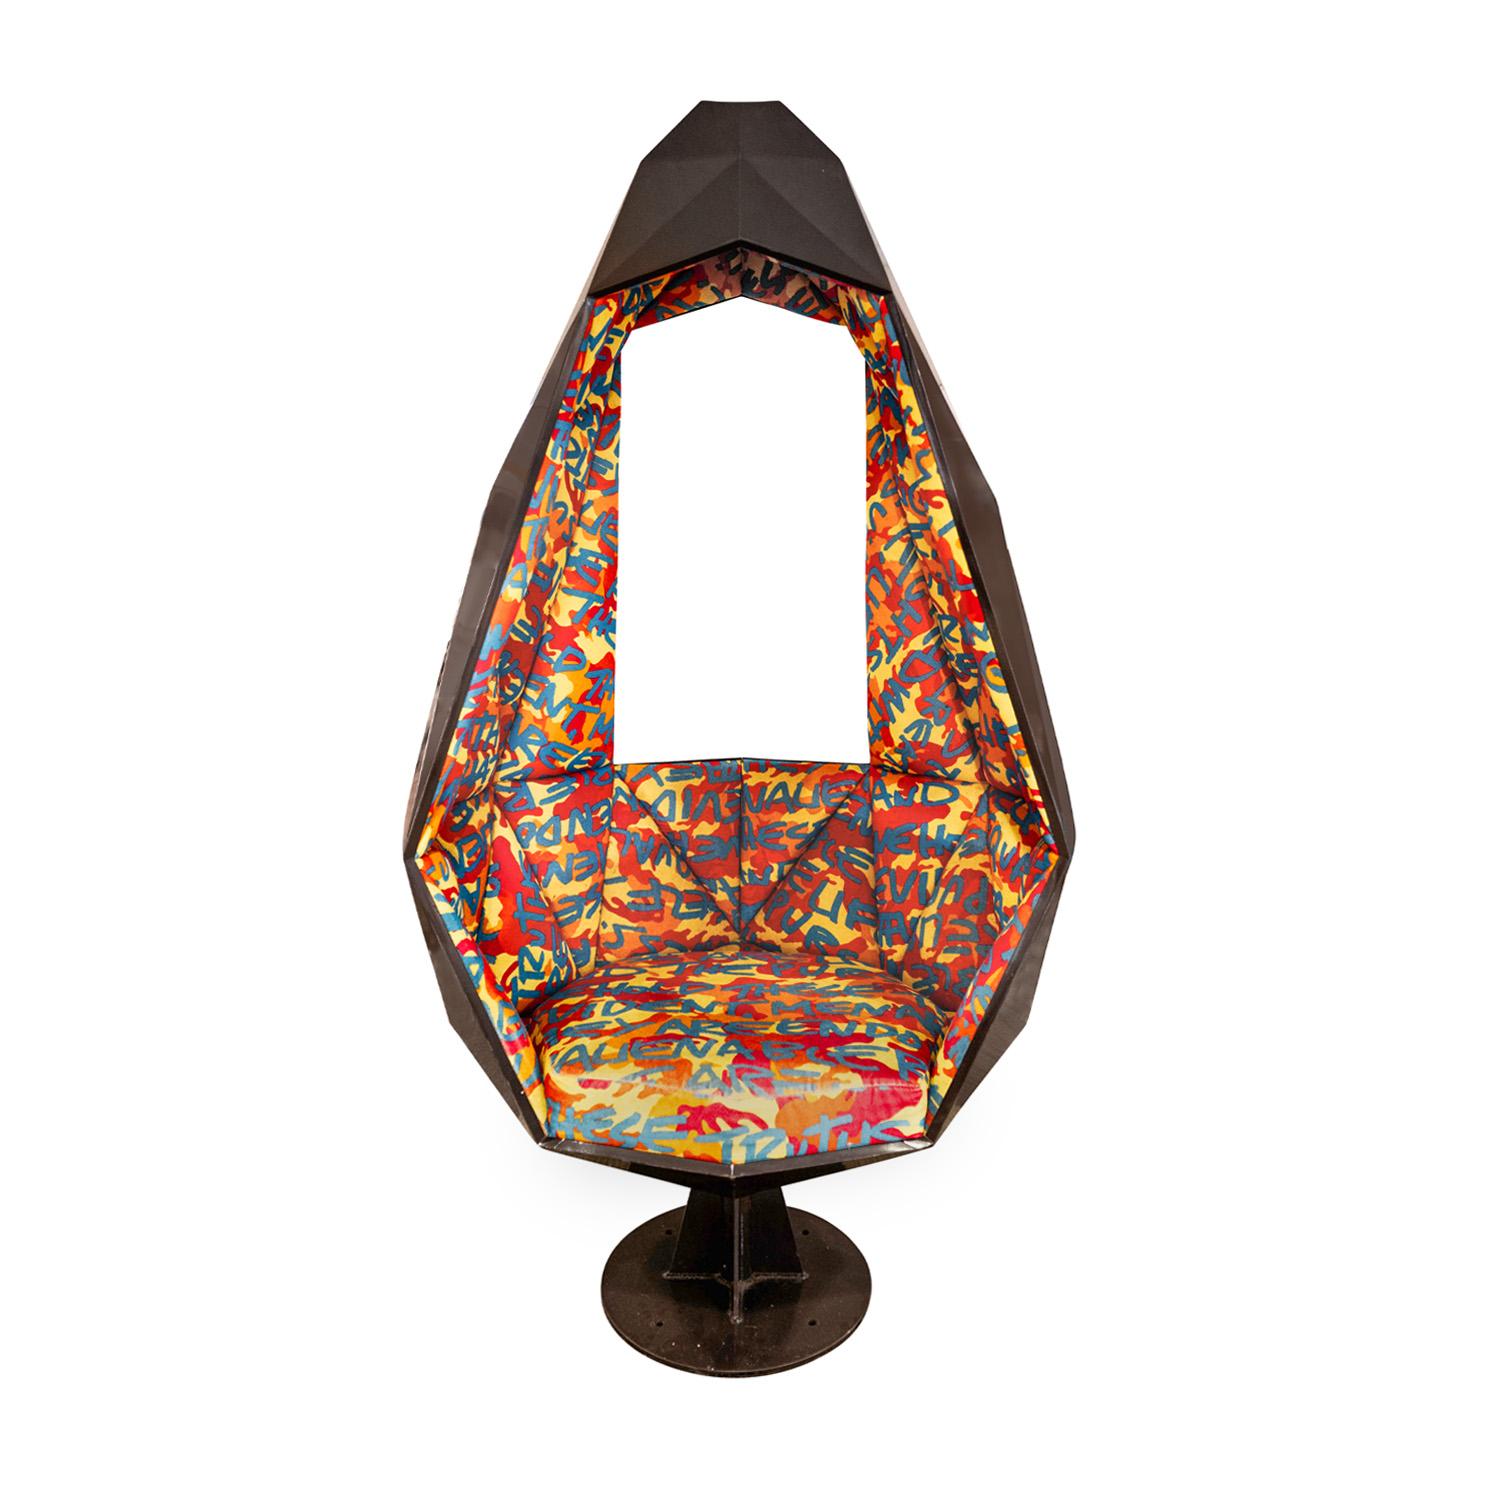 Rare and stunning Pod Chair with faceted body in aluminum with iconic colorful graffiti style fabric with phrases from the Declaration of Independence by Stephen Sprouse (1953-2004) for Knoll, American 2003.  The bases can be attached to the floor. 